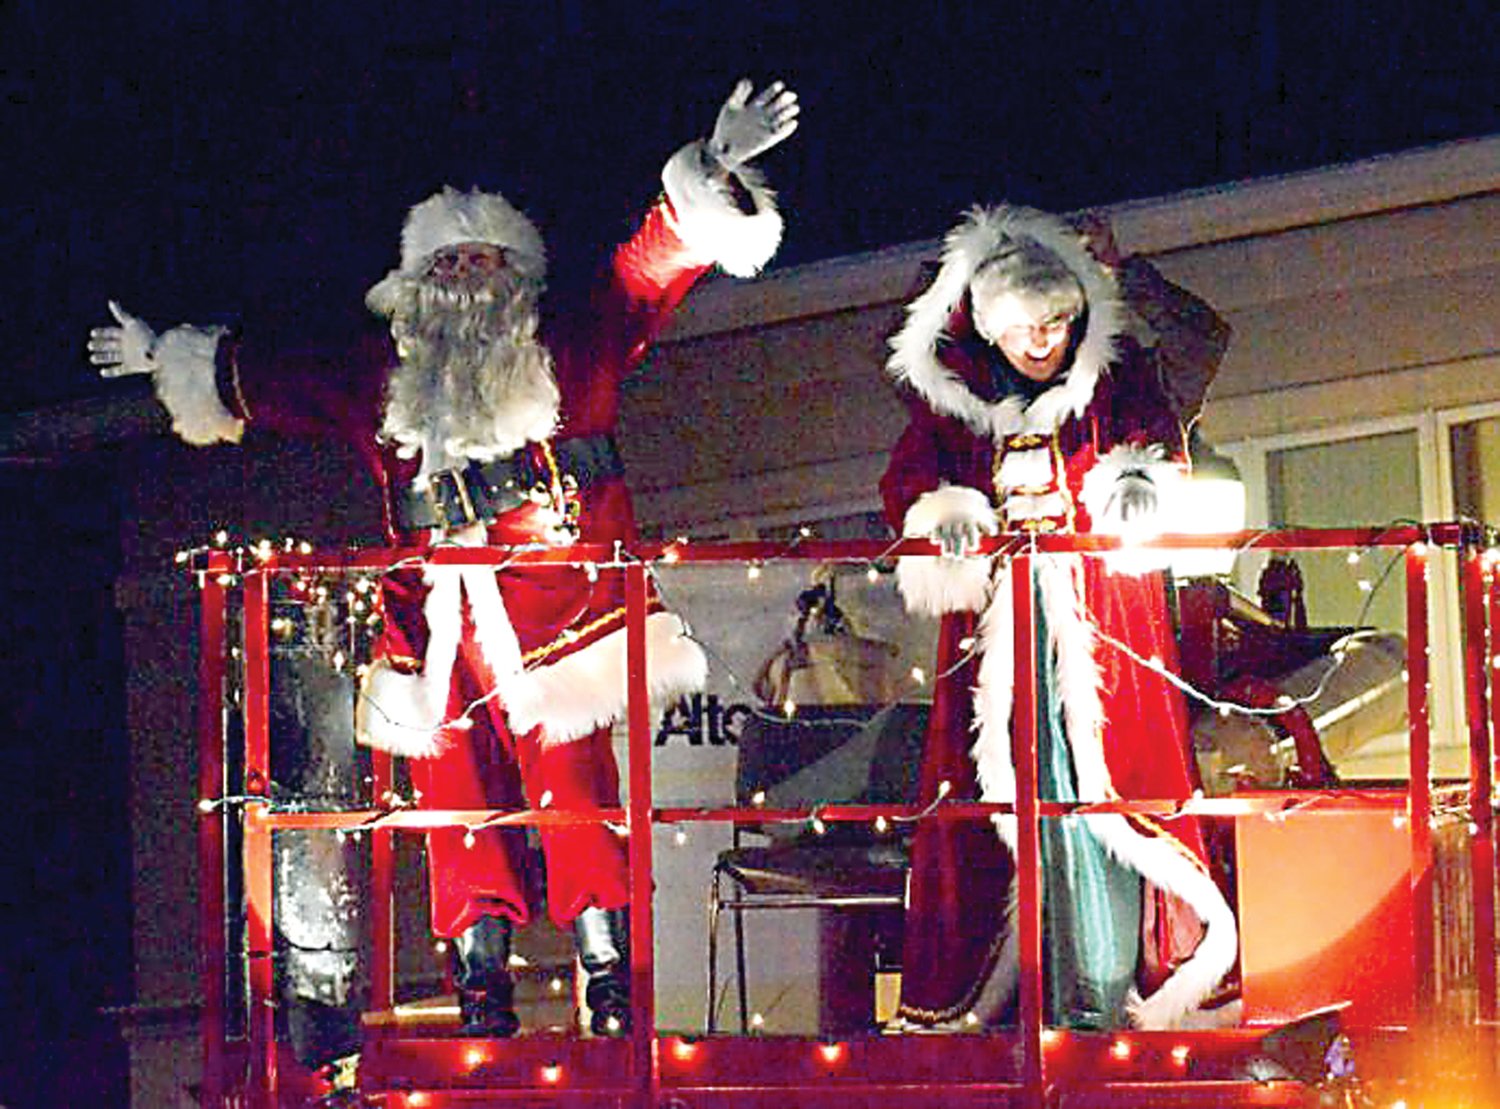 Santa and Mrs. Claus wave to the crowd.